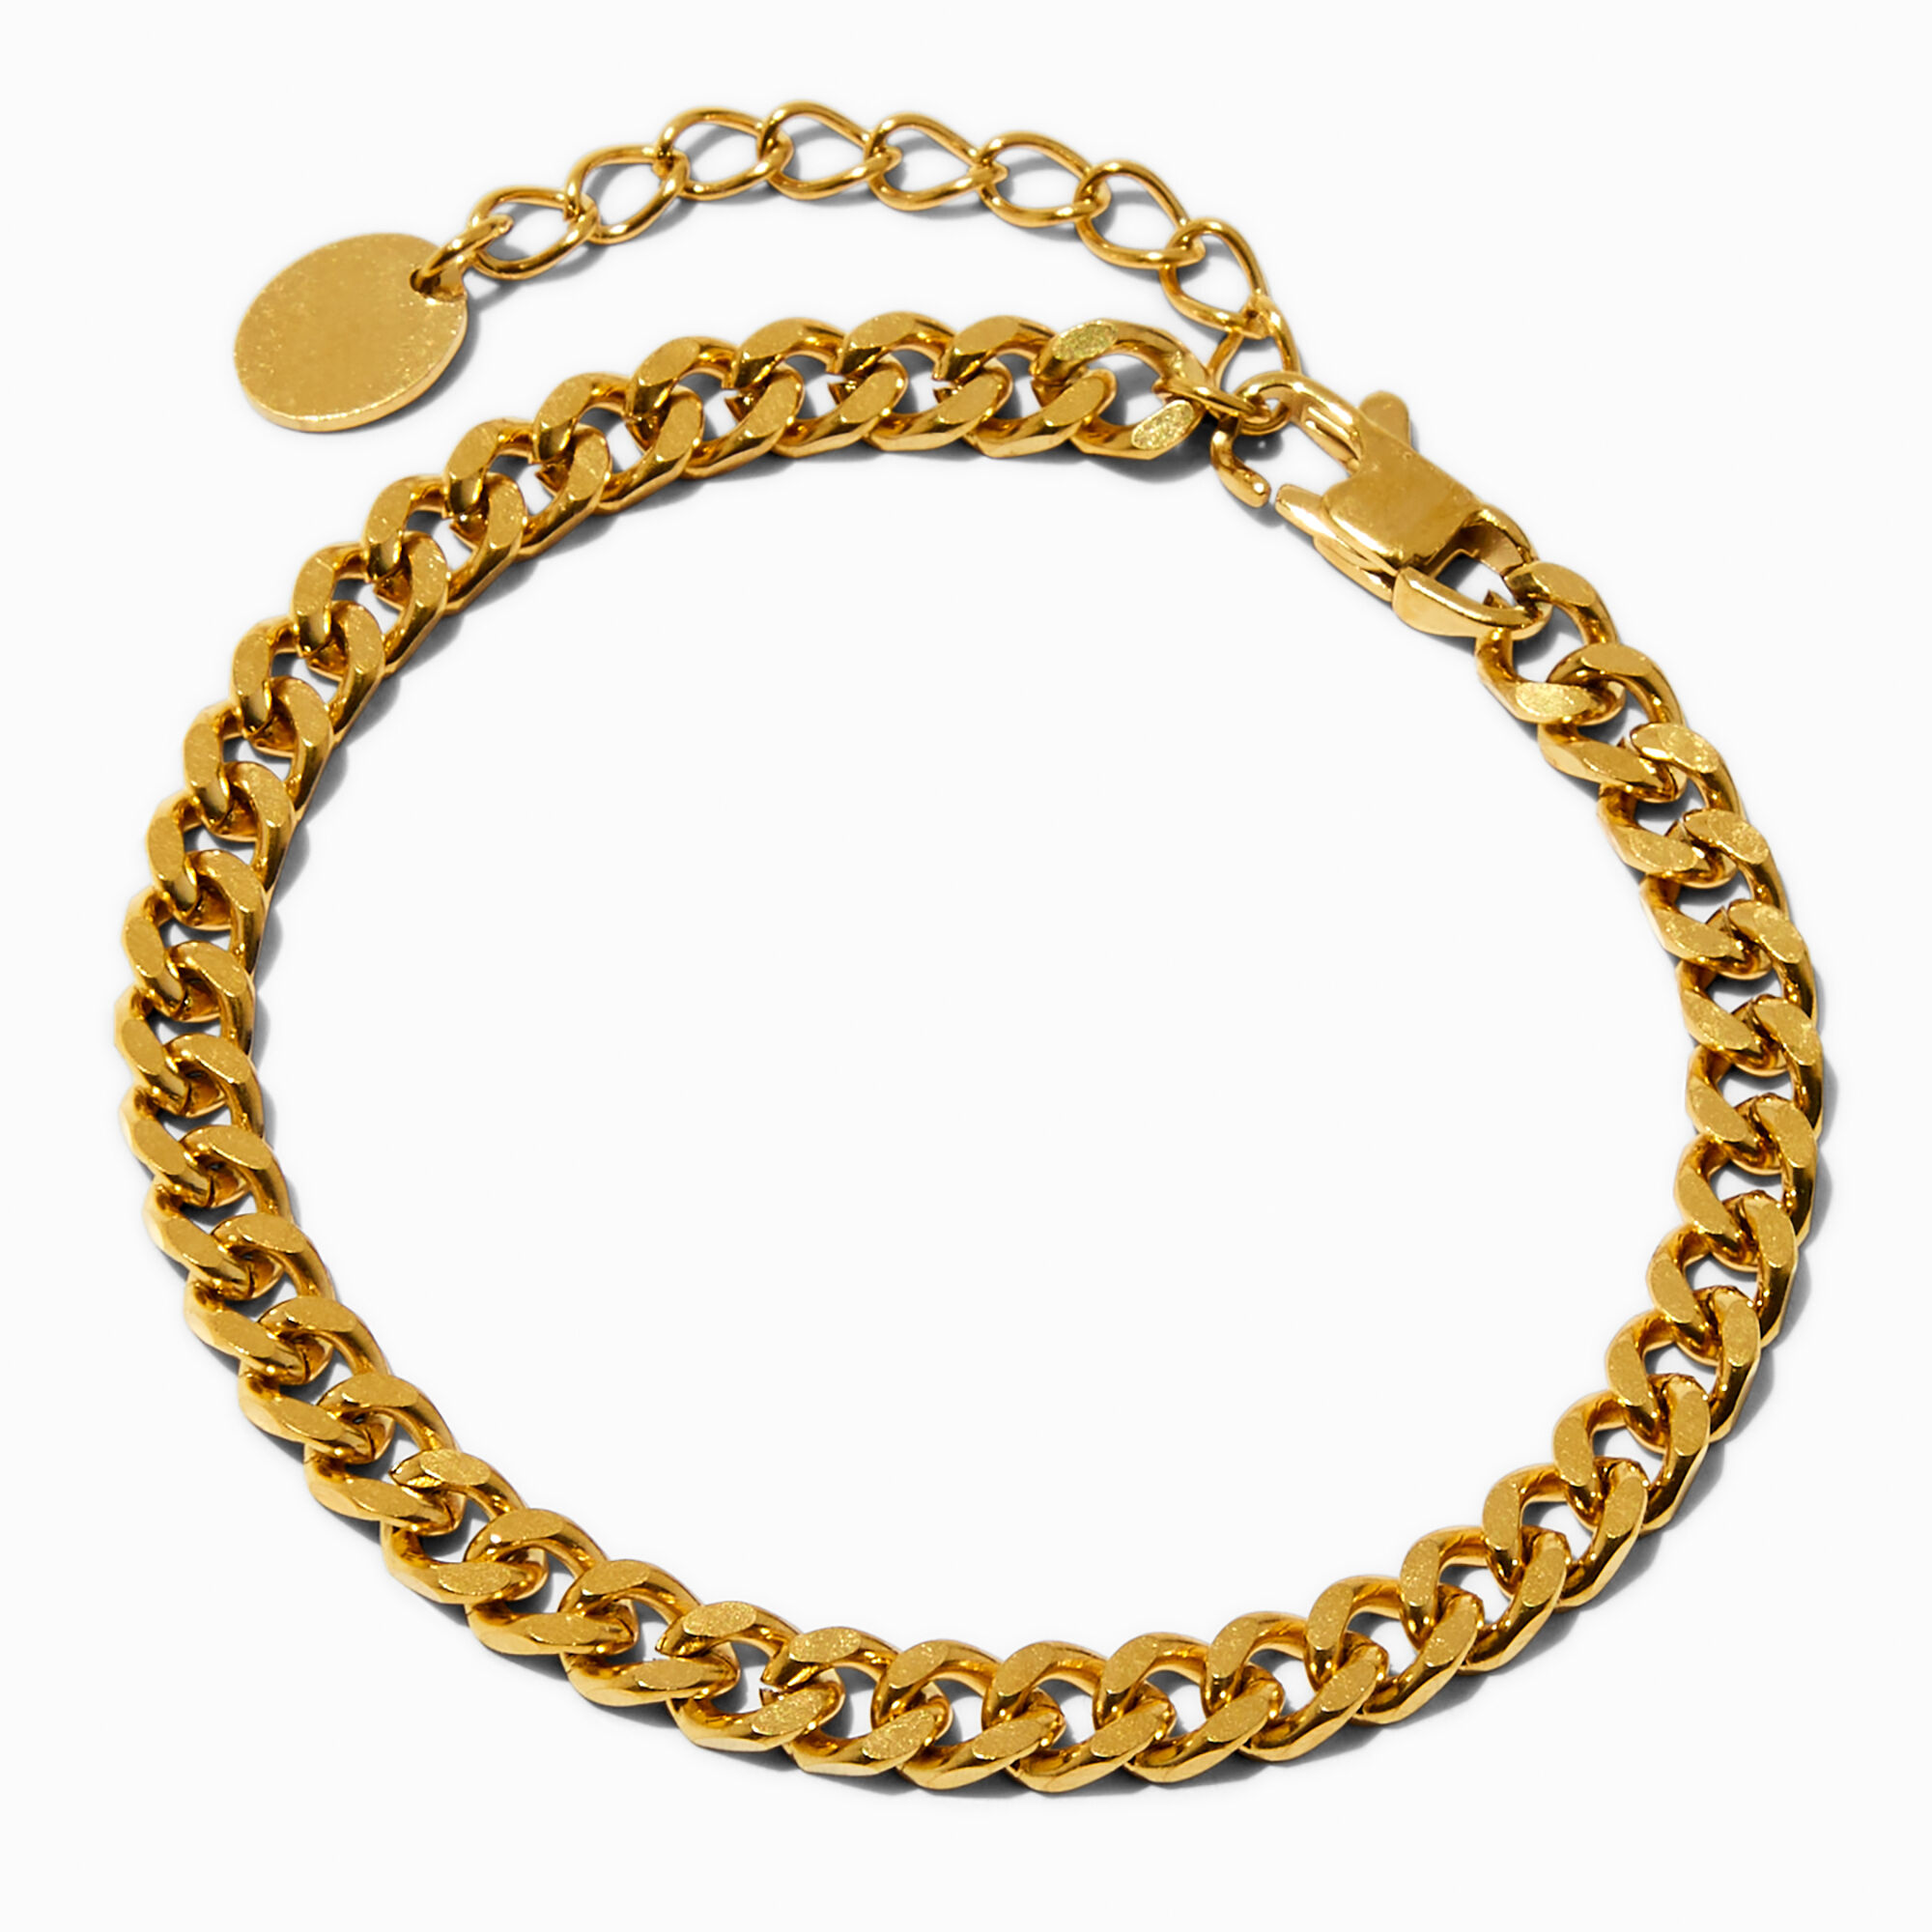 View Claires Tone Stainless Steel 6MM Curb Chain Bracelet Gold information